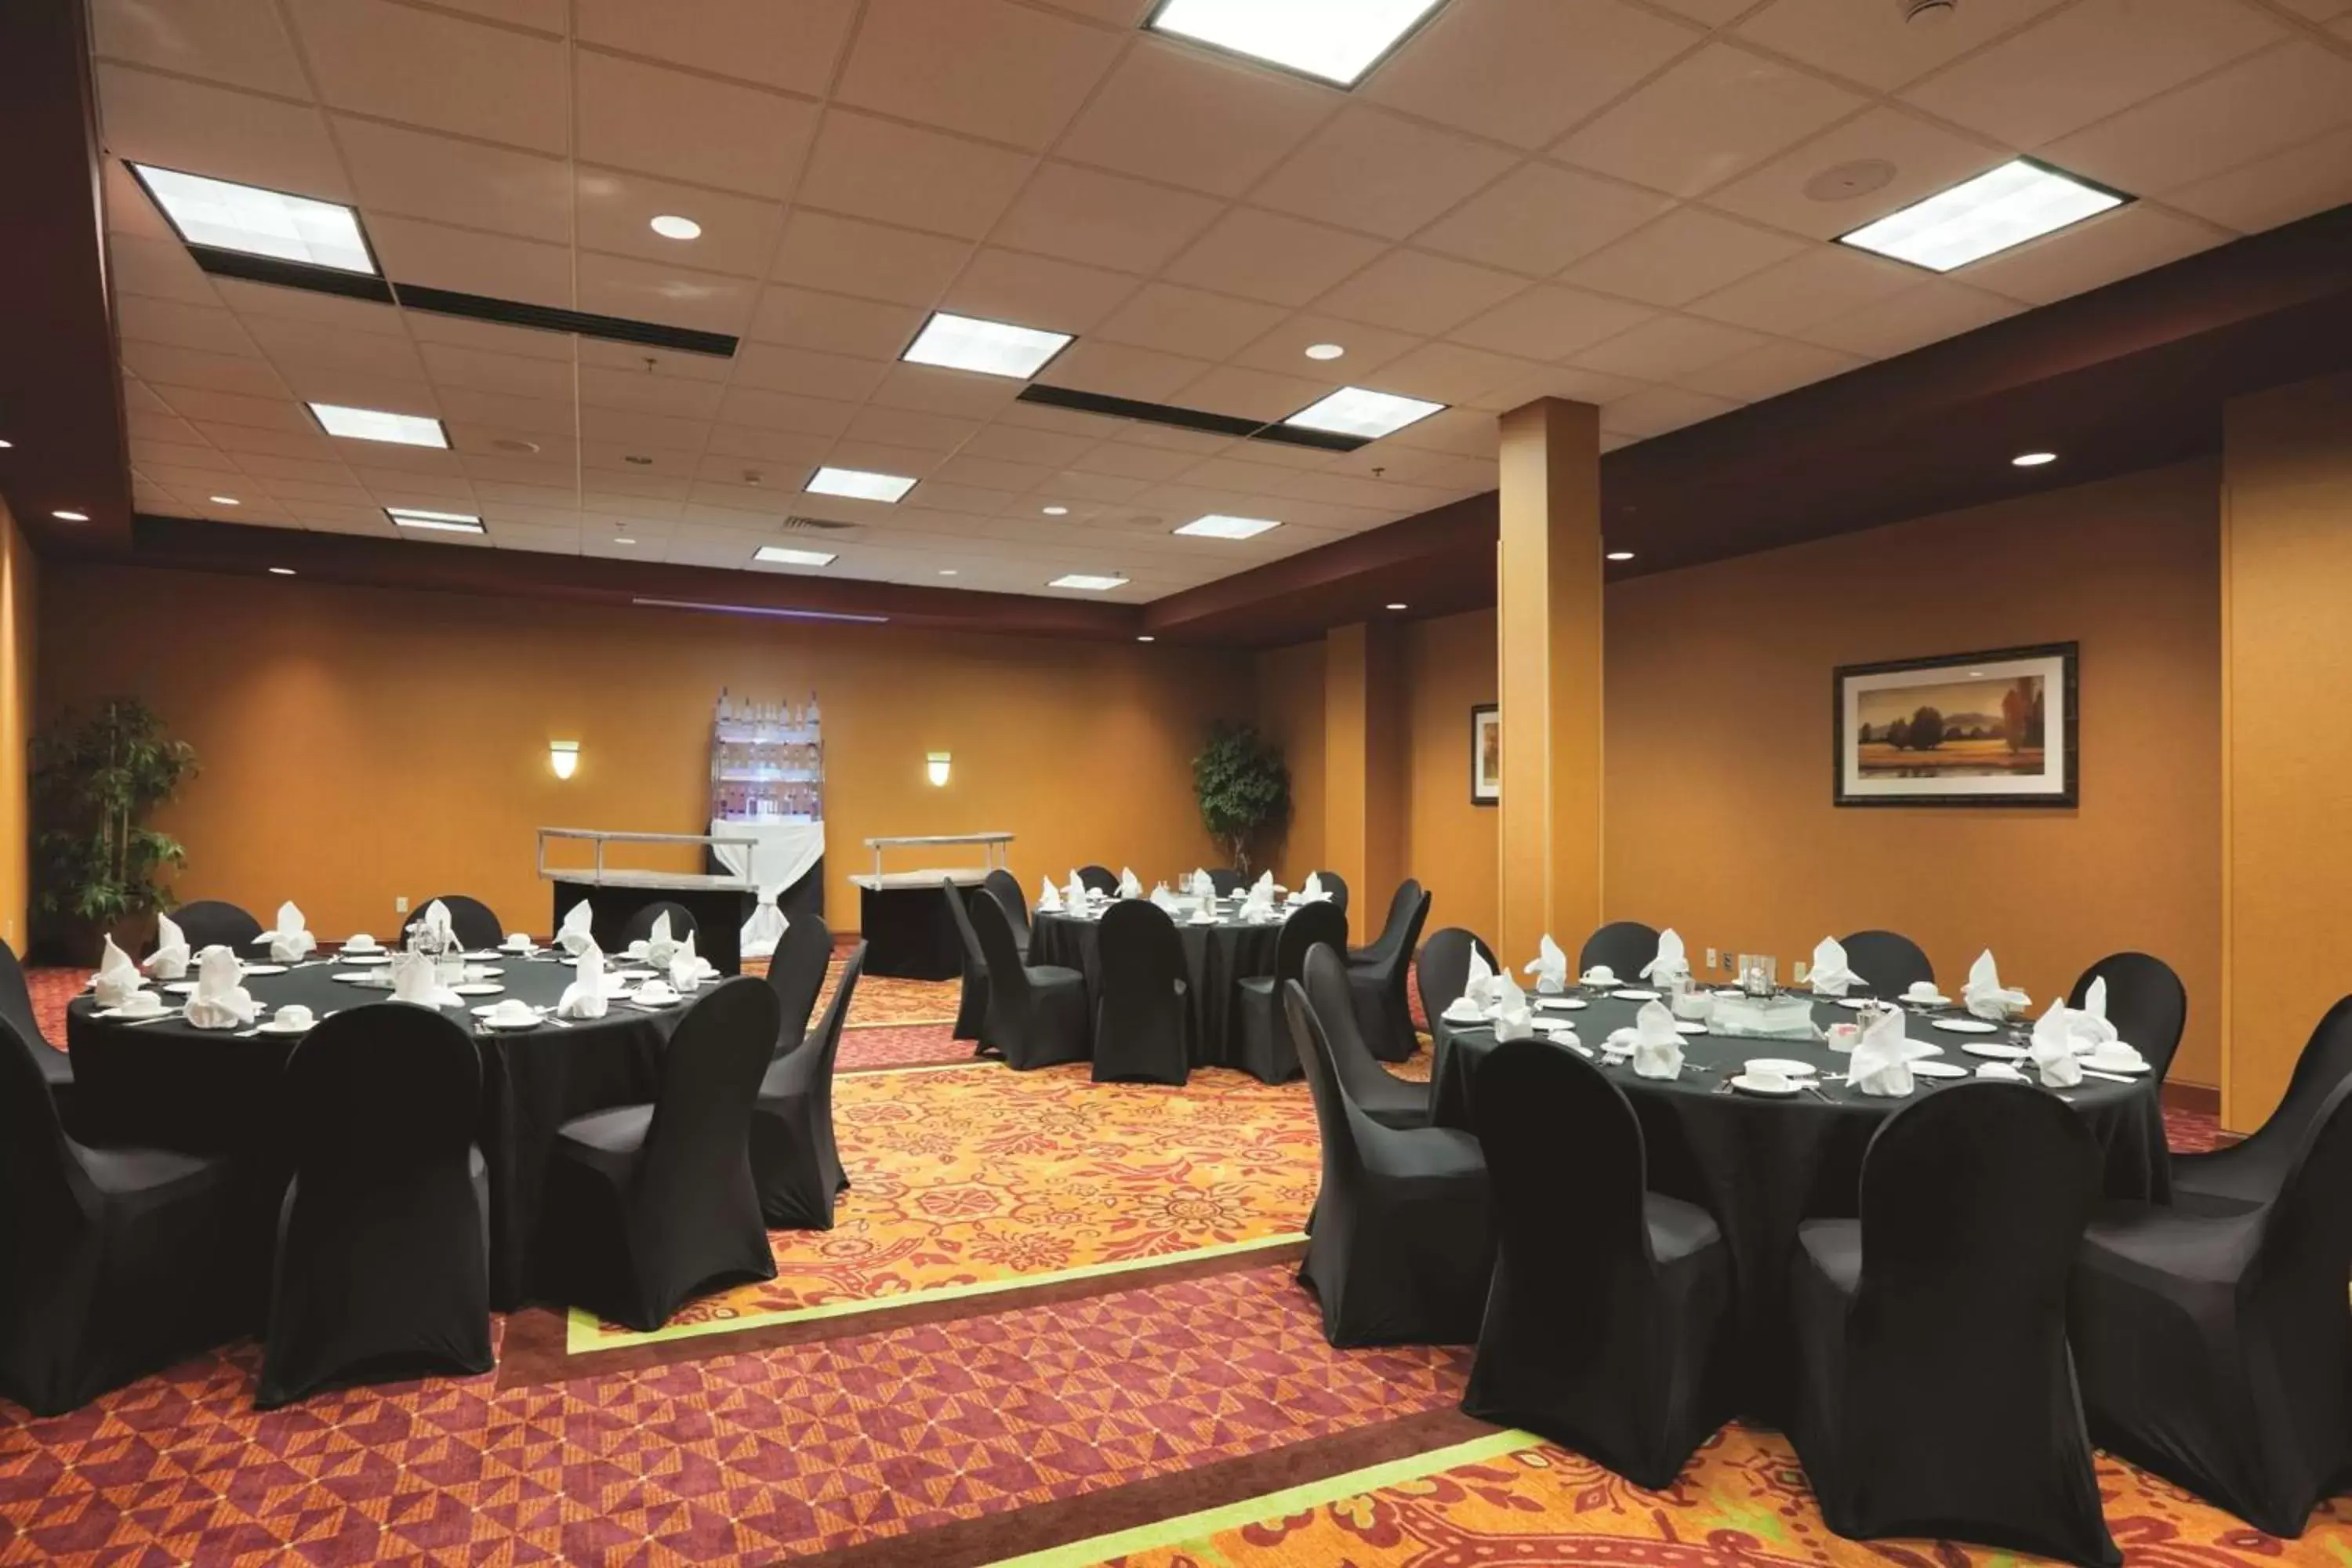 Meeting/conference room, Banquet Facilities in Embassy Suites East Peoria Hotel and Riverfront Conference Center